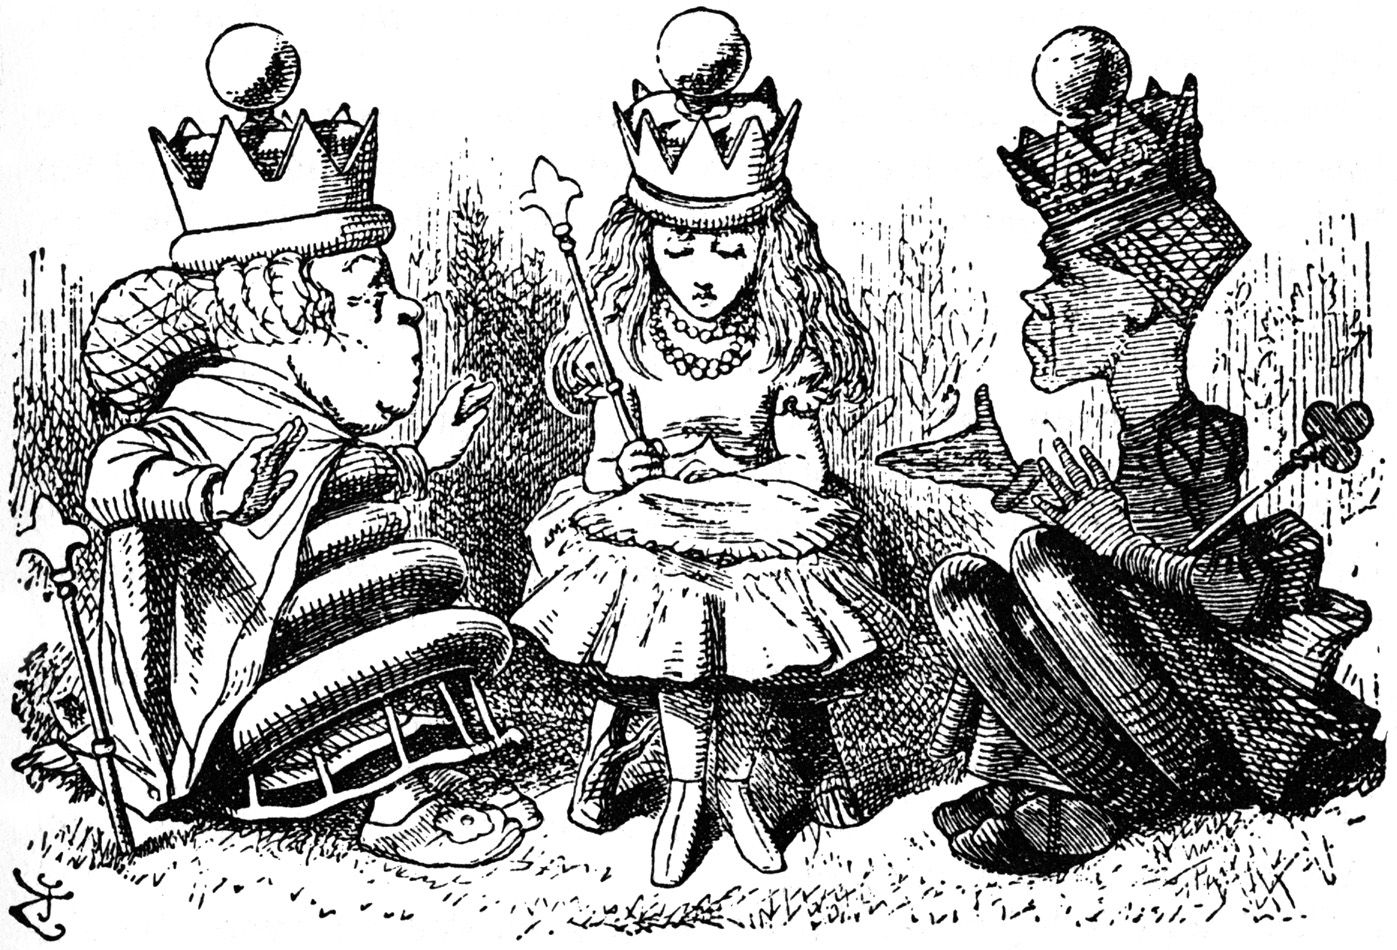 Sketch of Alice being yelled at by the Red Queen and the White Queen